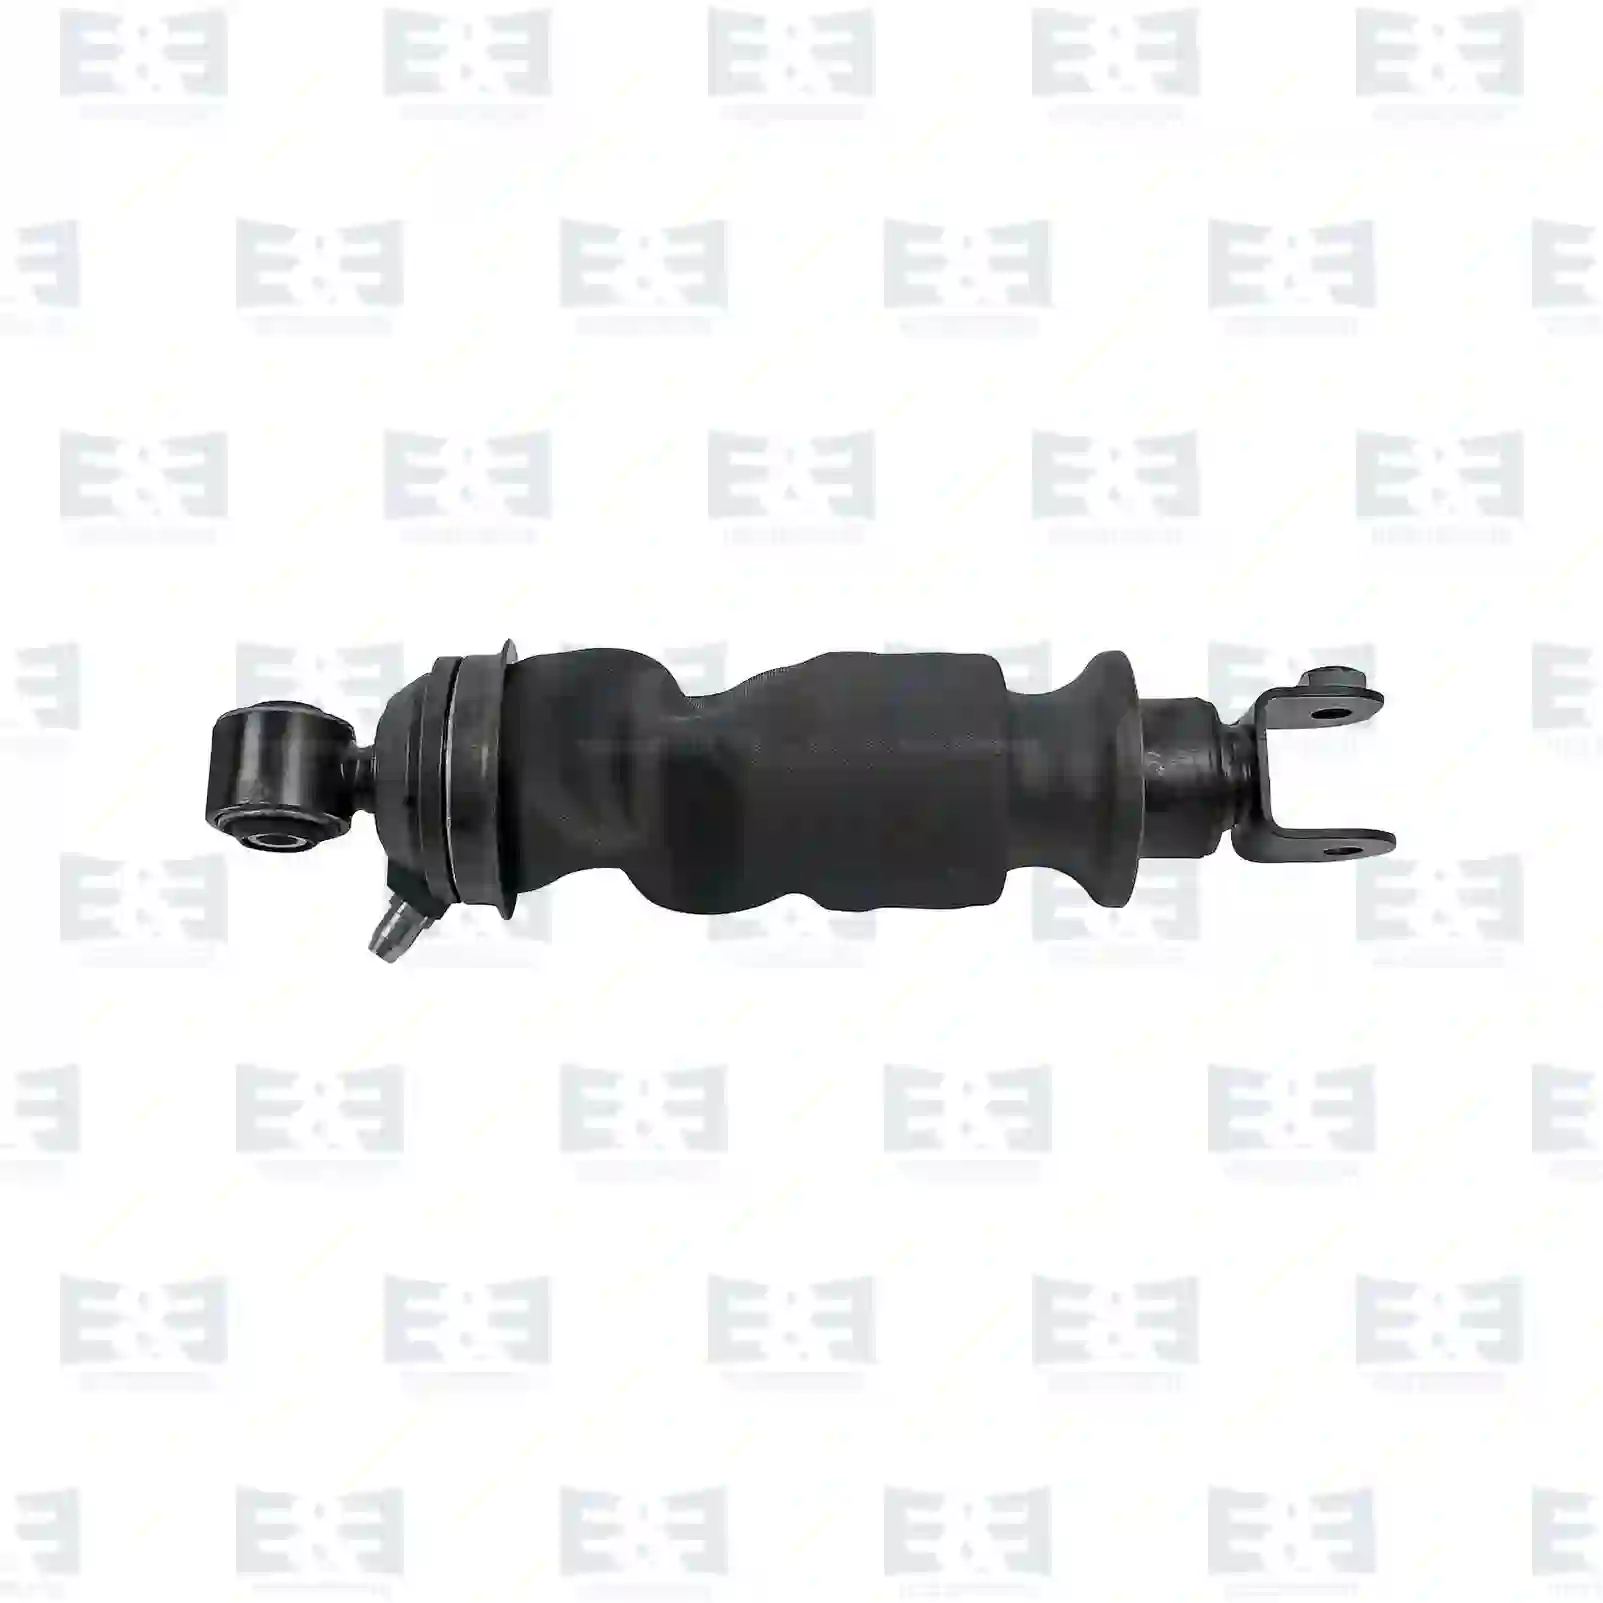 Cabin shock absorber, with air bellow, 2E2275280, 1870615, , , , , ||  2E2275280 E&E Truck Spare Parts | Truck Spare Parts, Auotomotive Spare Parts Cabin shock absorber, with air bellow, 2E2275280, 1870615, , , , , ||  2E2275280 E&E Truck Spare Parts | Truck Spare Parts, Auotomotive Spare Parts